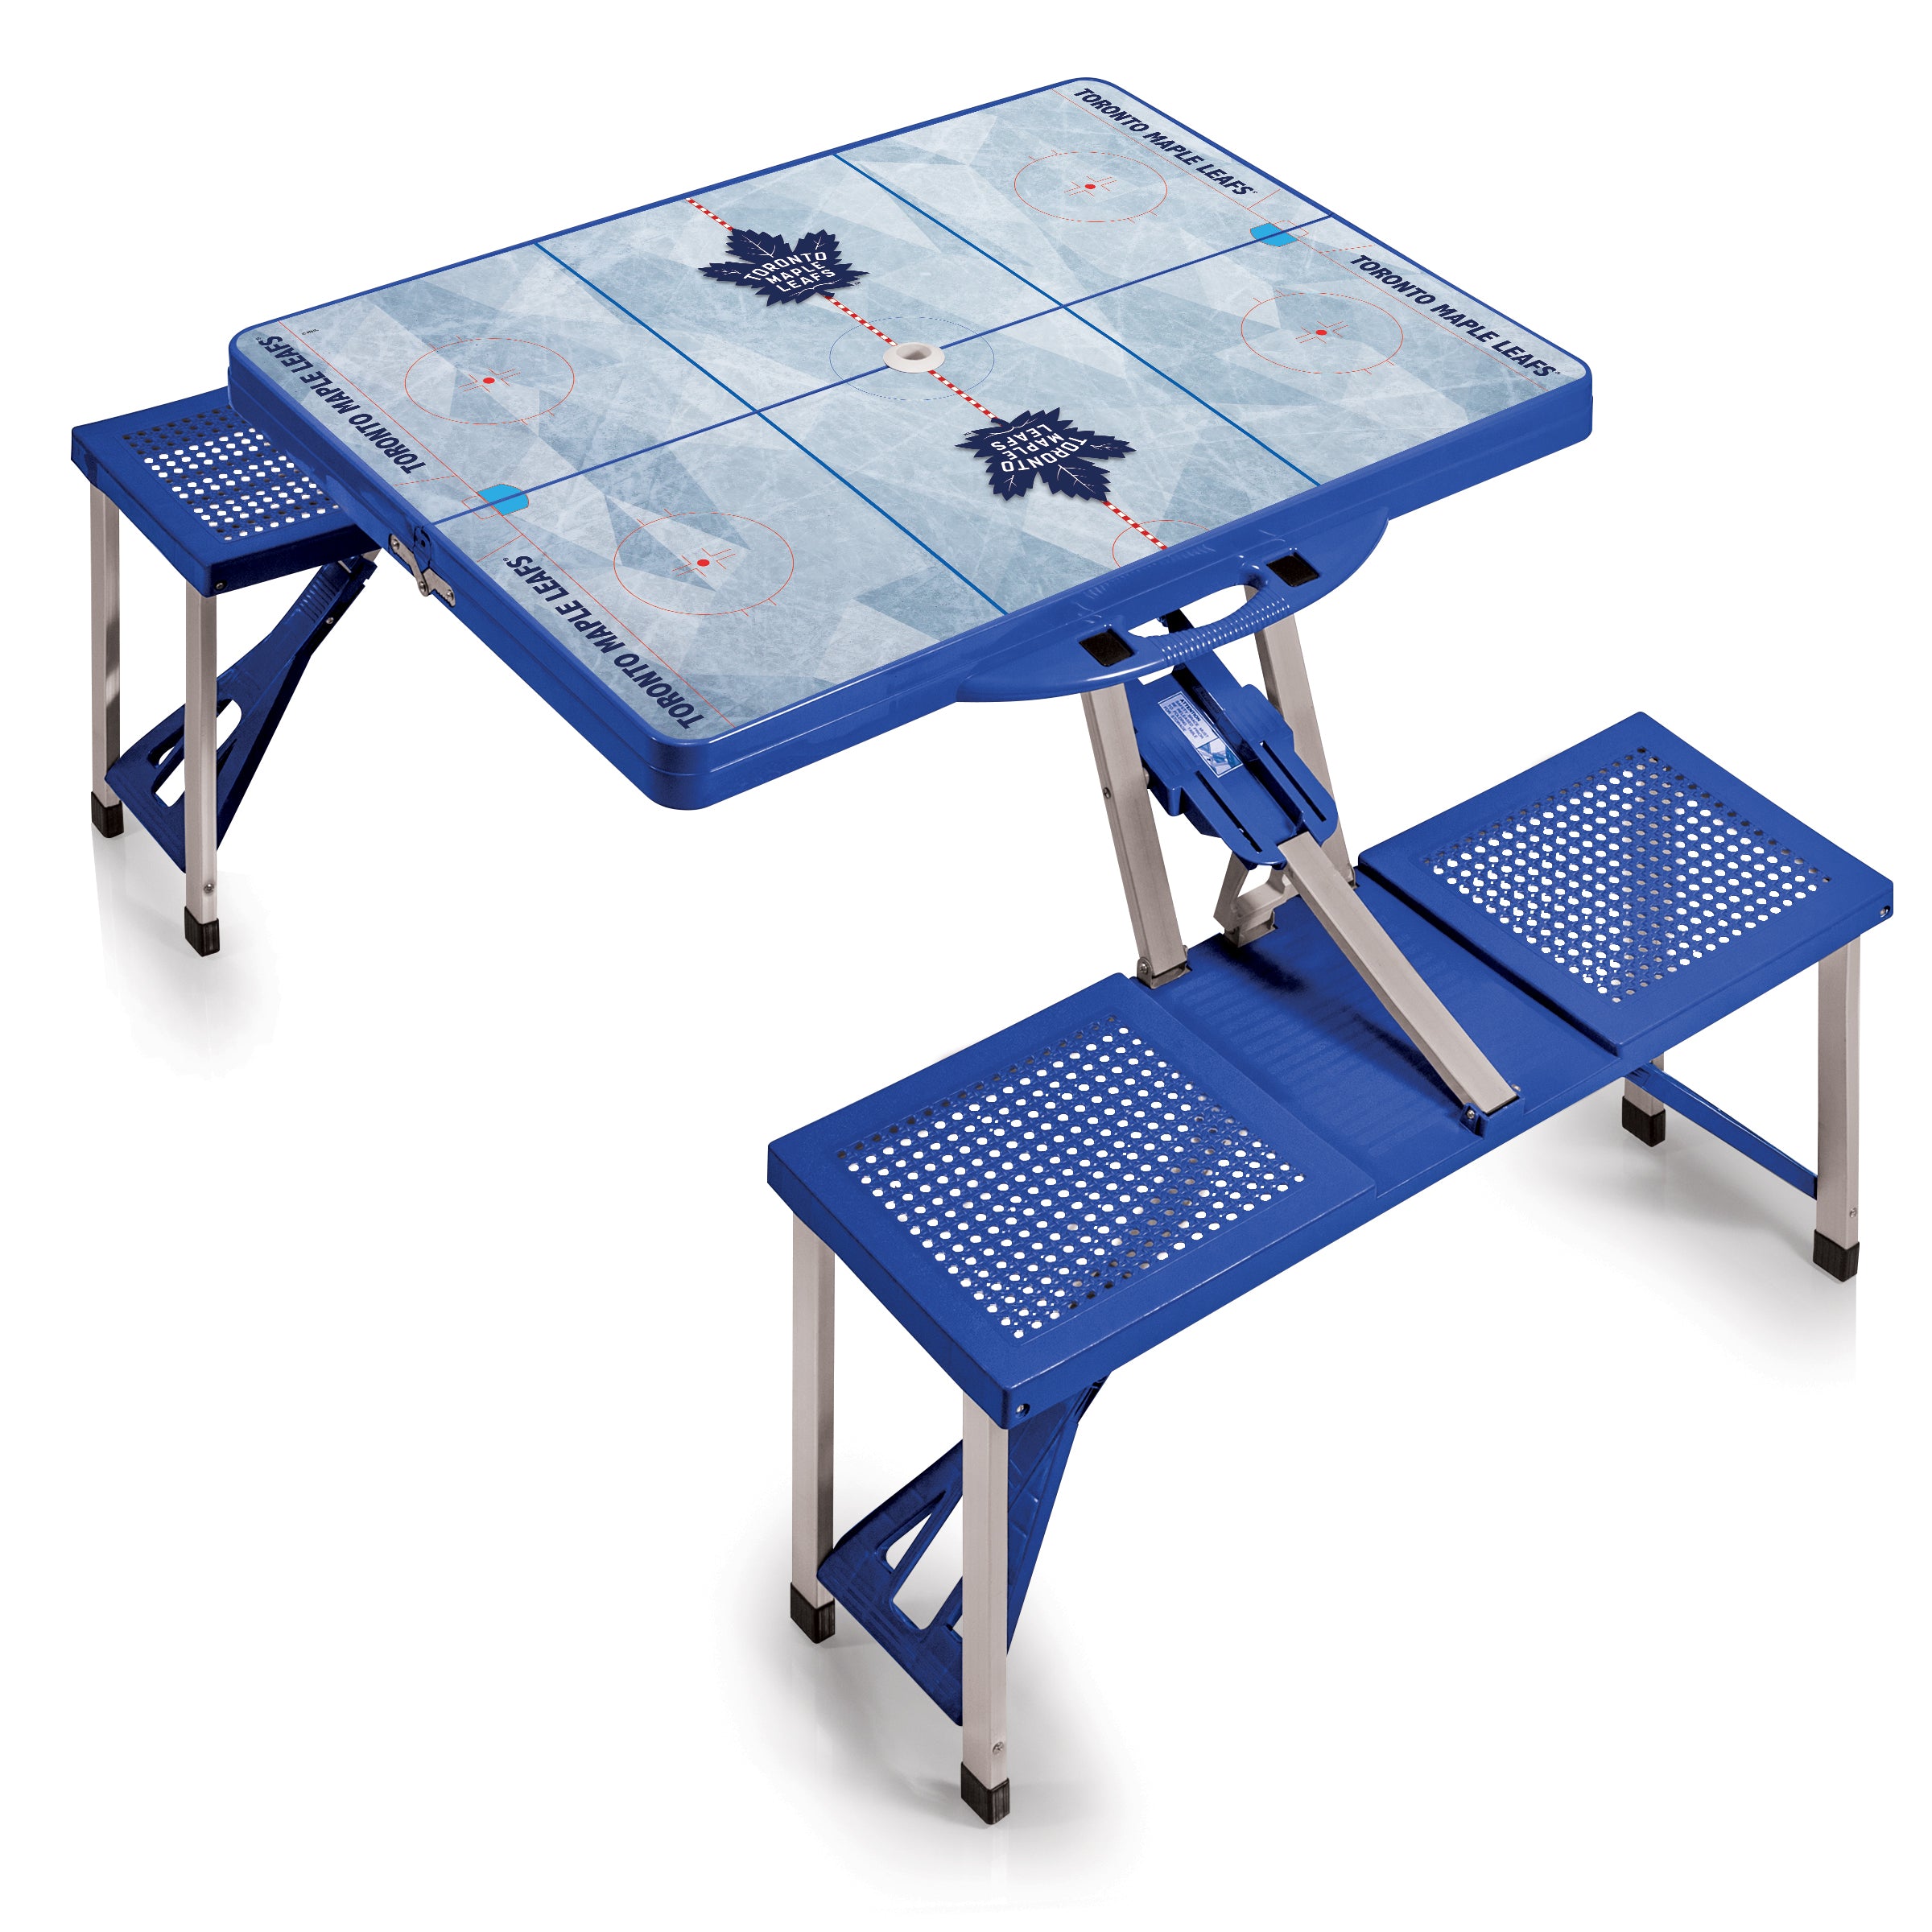 Hockey Rink - Toronto Maple Leafs - Picnic Table Portable Folding Table with Seats